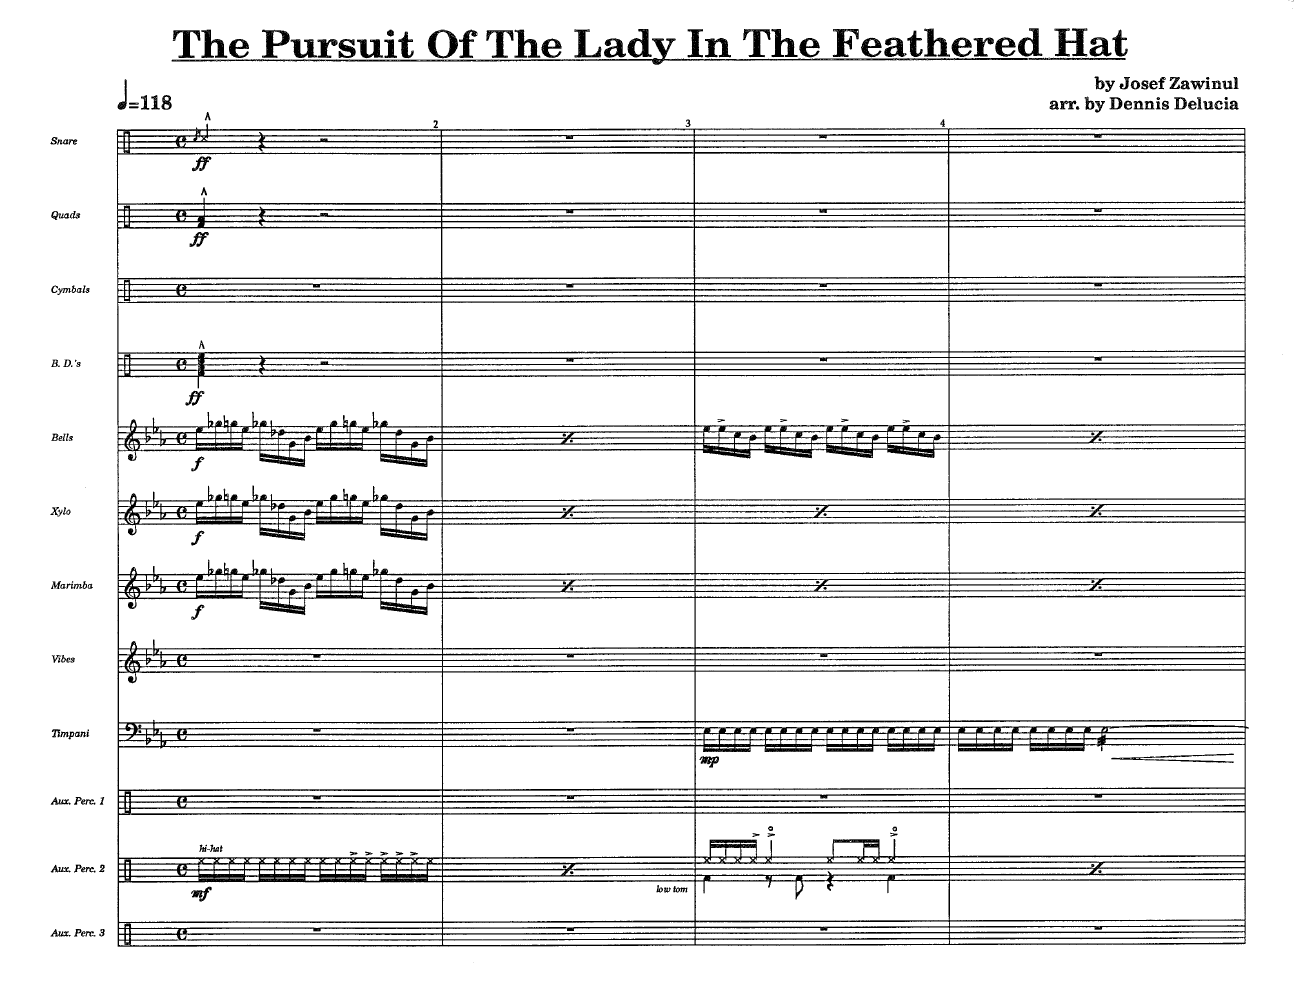 The Pursuit of the Lady in the Feathered Hat